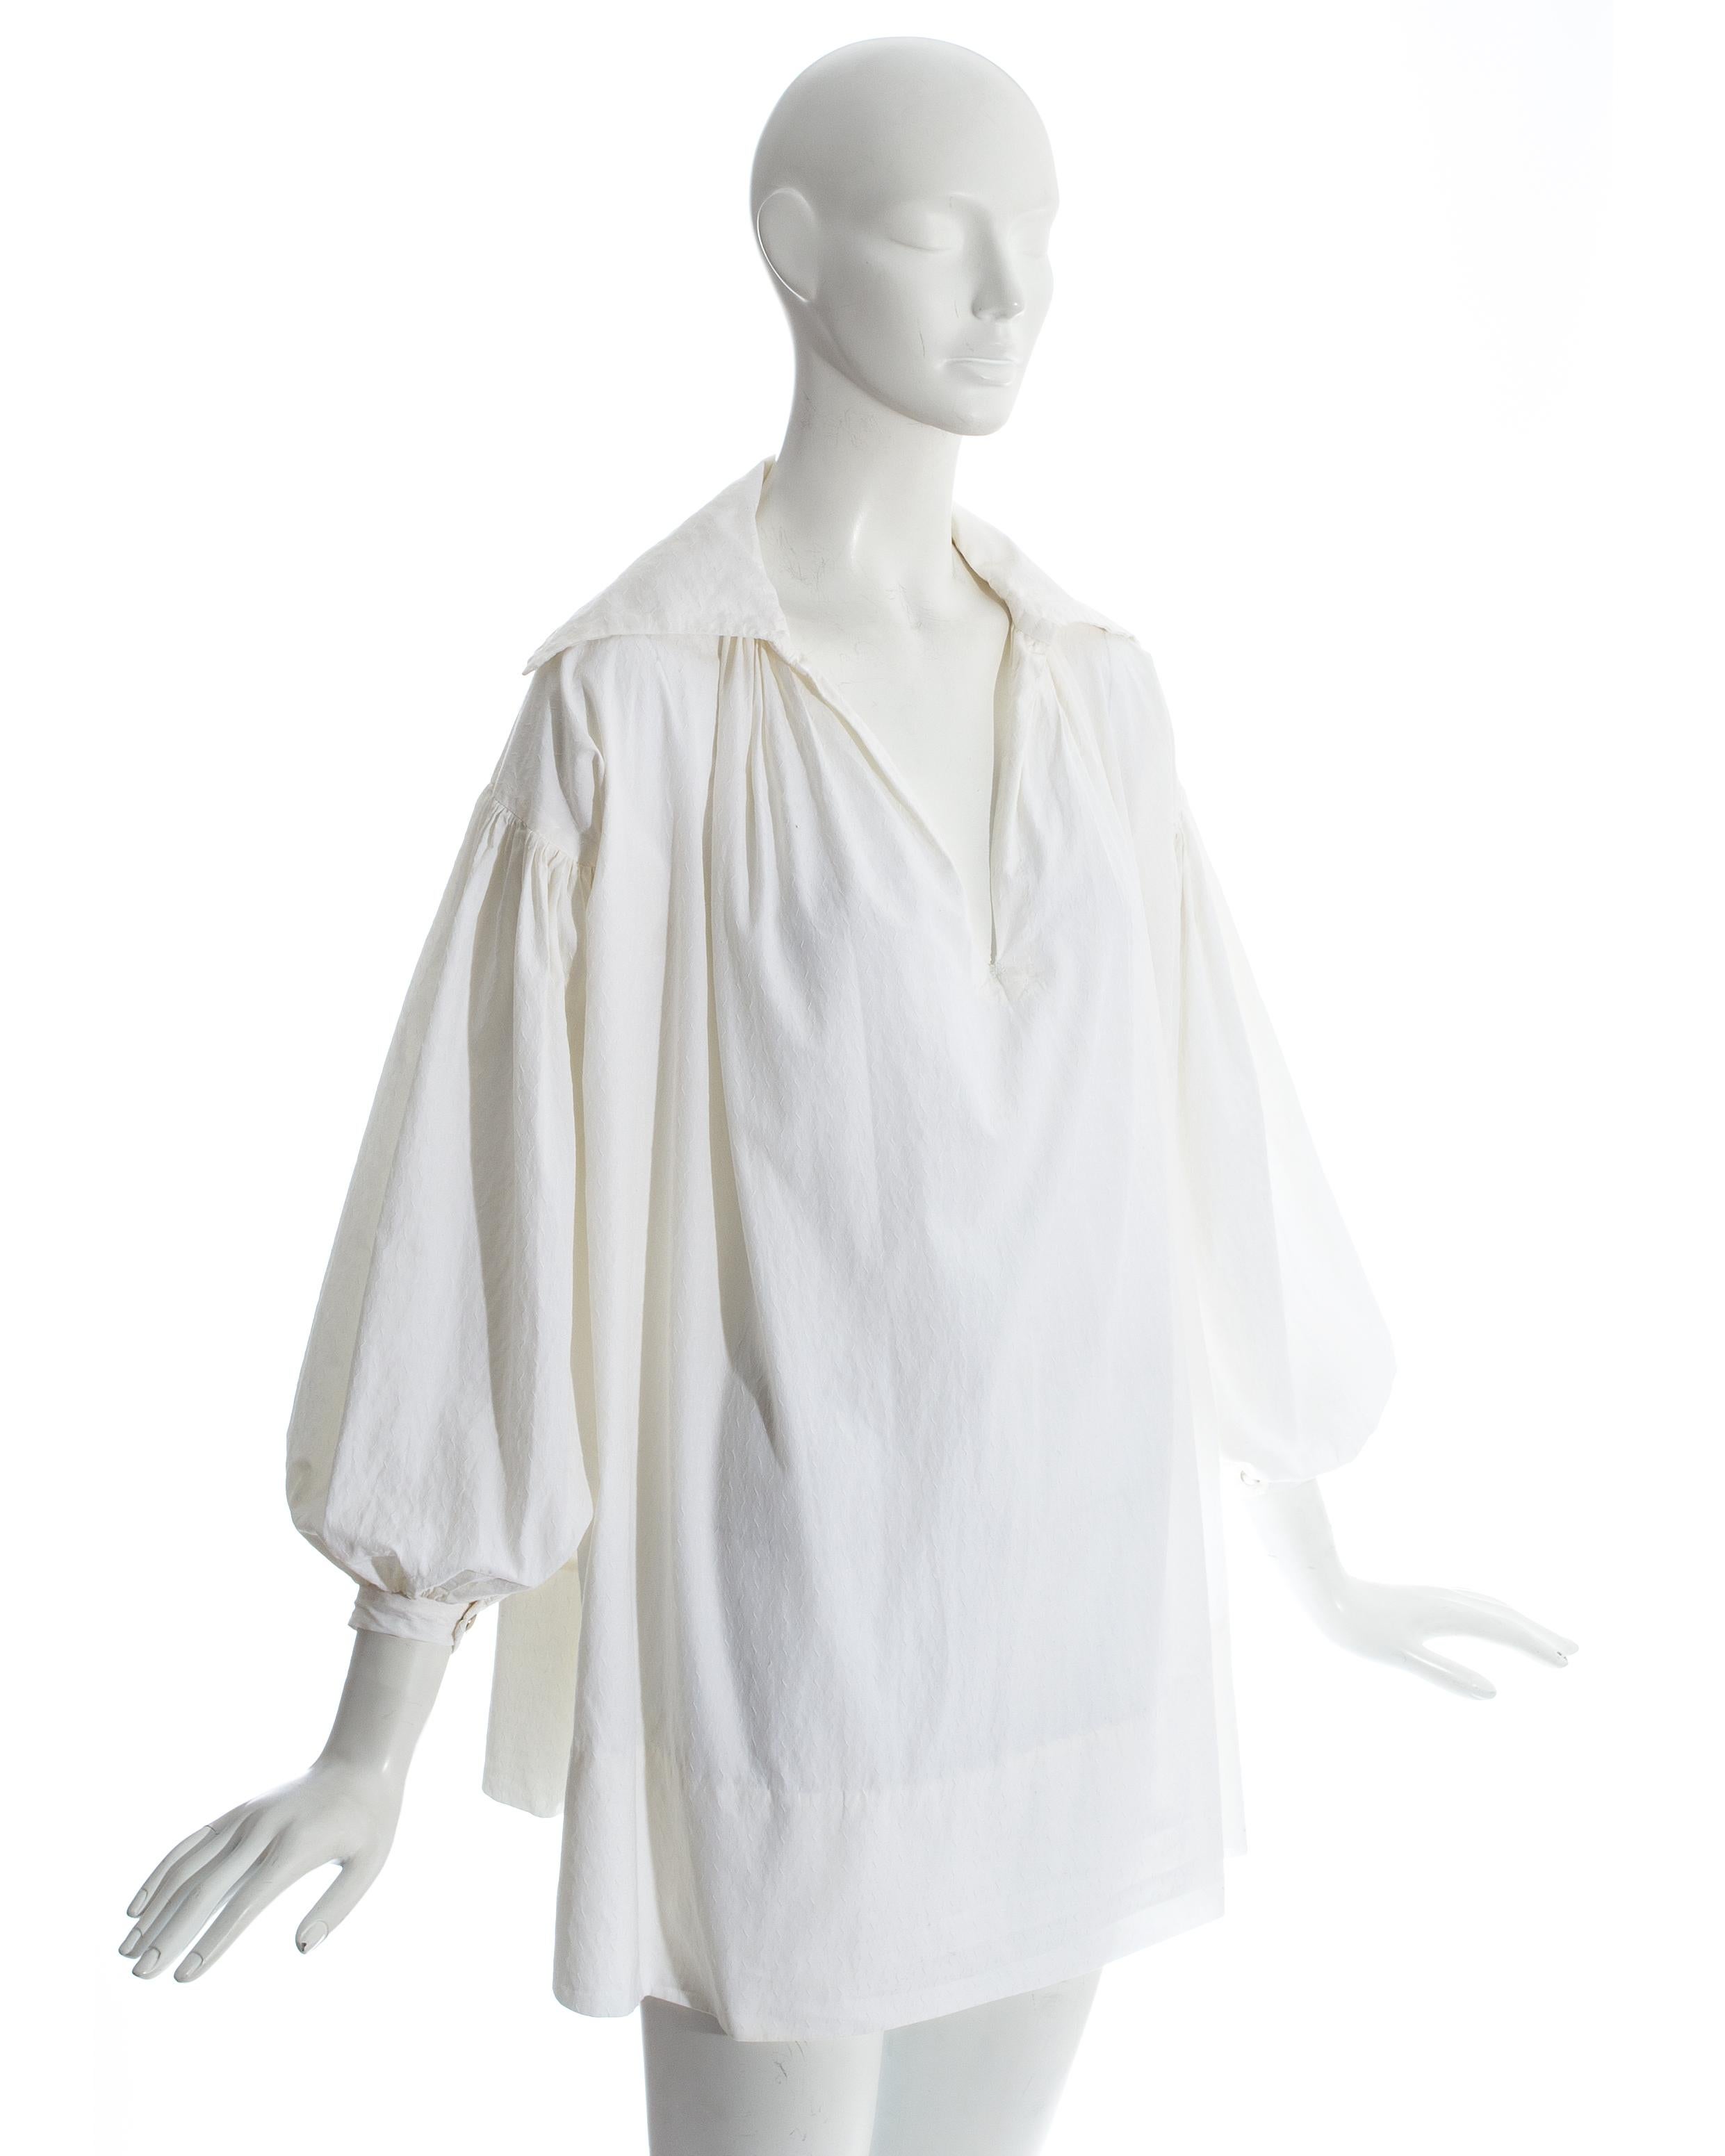 Worlds End by Vivienne Westwood and Malcolm McLaren; White oversized pirate blouse in cotton jacquard. Press stud fastening on cuffs. 

'Pirates' Fall-Winter 1981 